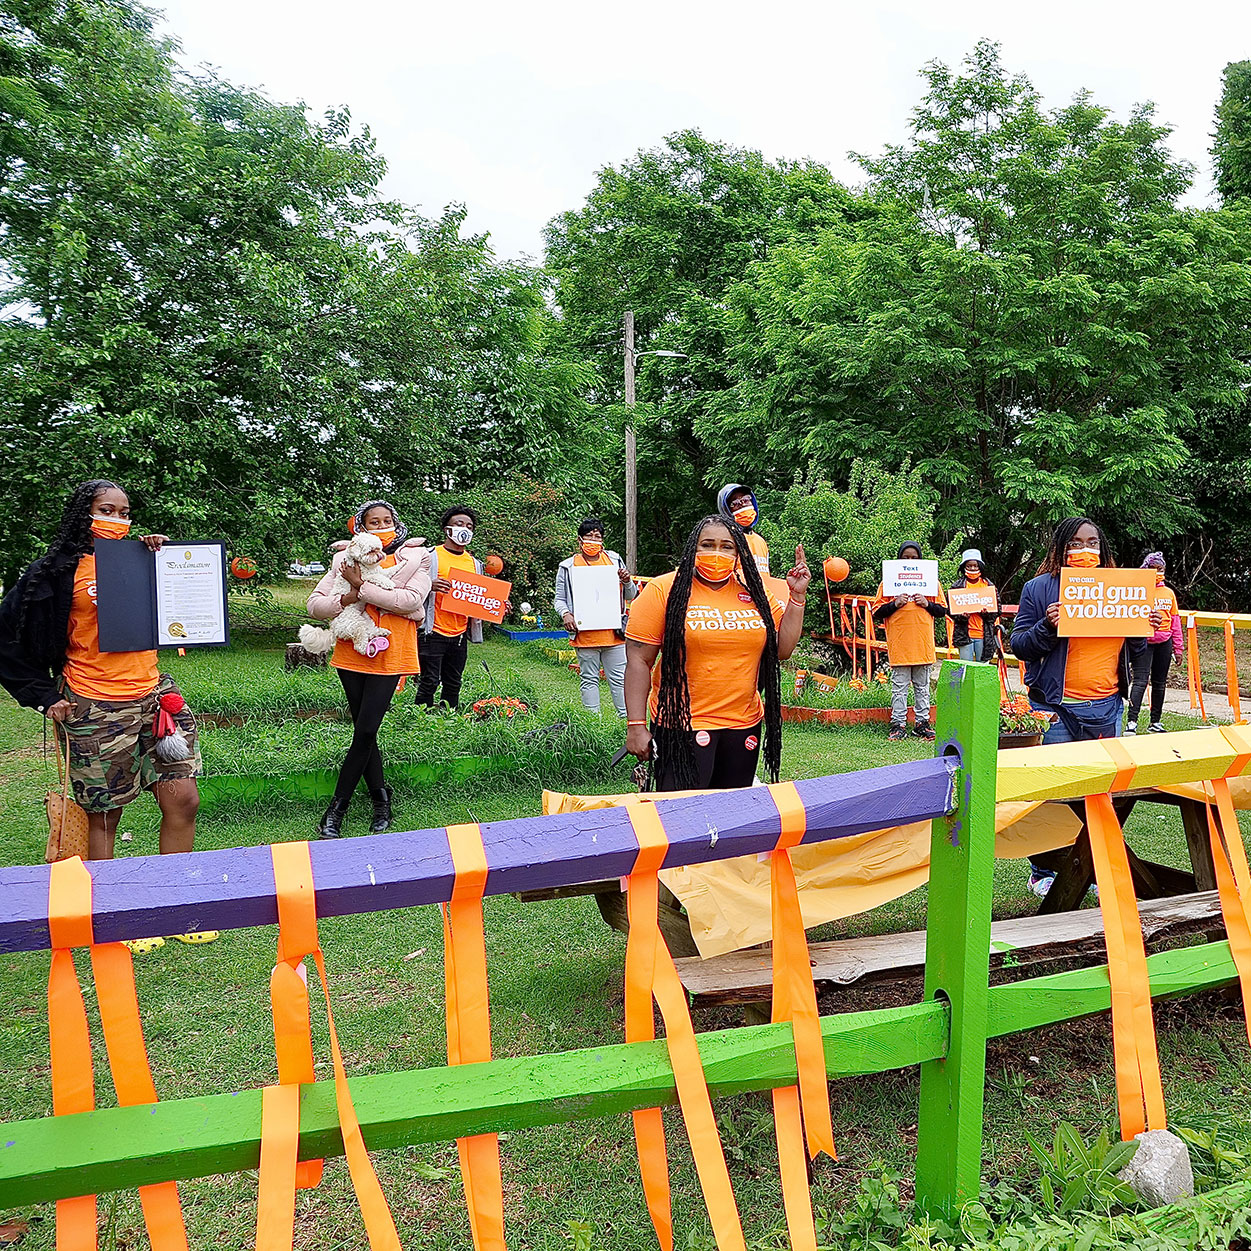 Let's Thrive Baltimore volunteers stand in a garden decorated with orange ribbons